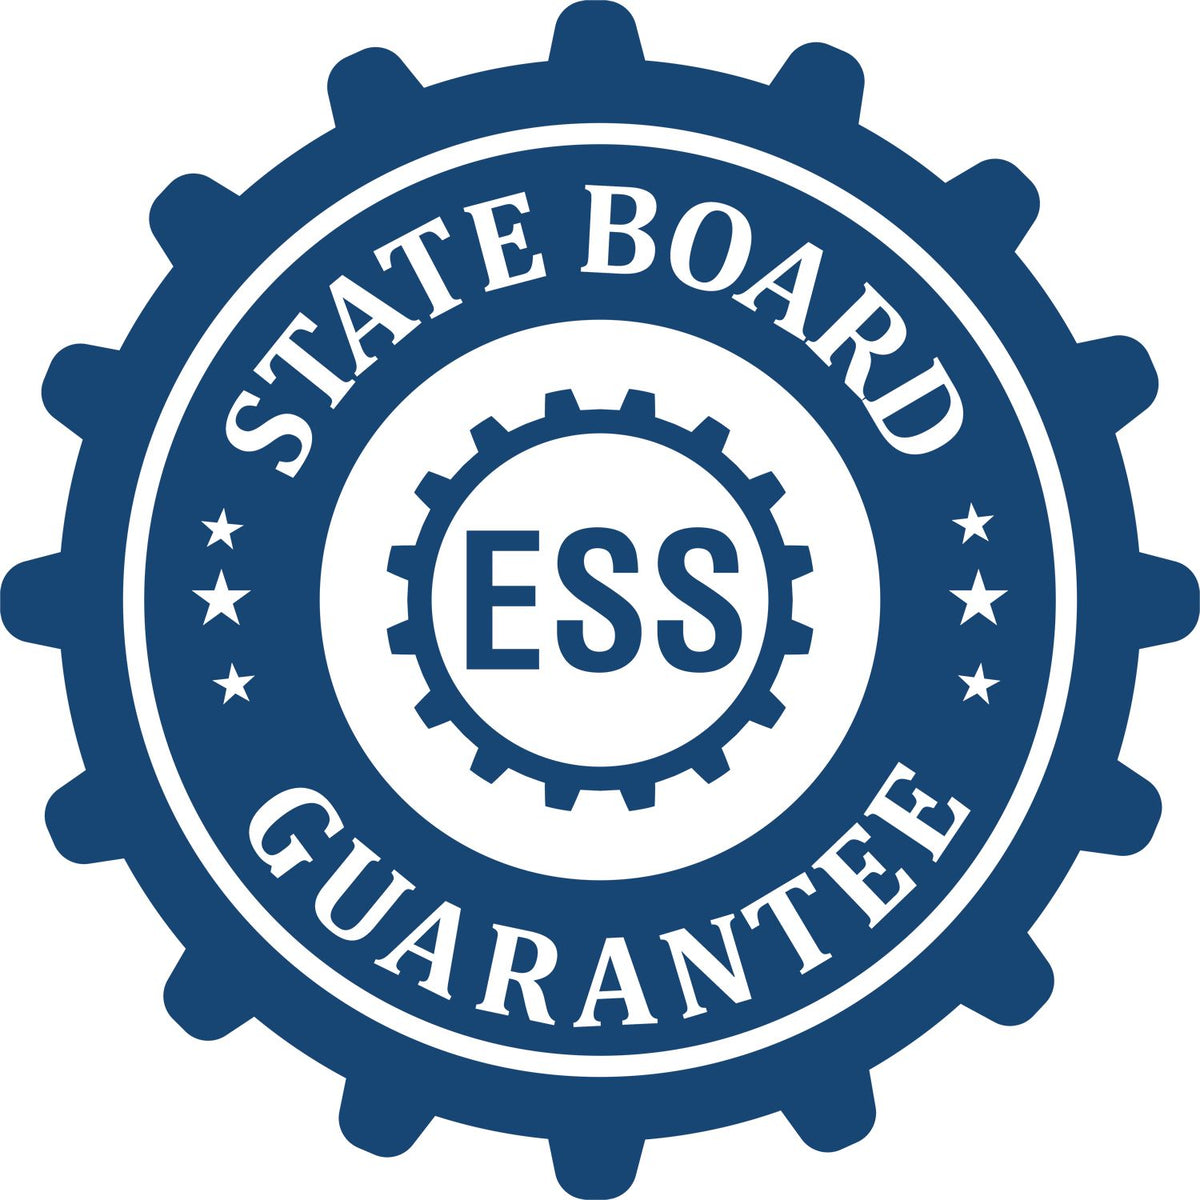 An emblem in a gear shape illustrating a state board guarantee for the Utah Engineer Desk Seal product.